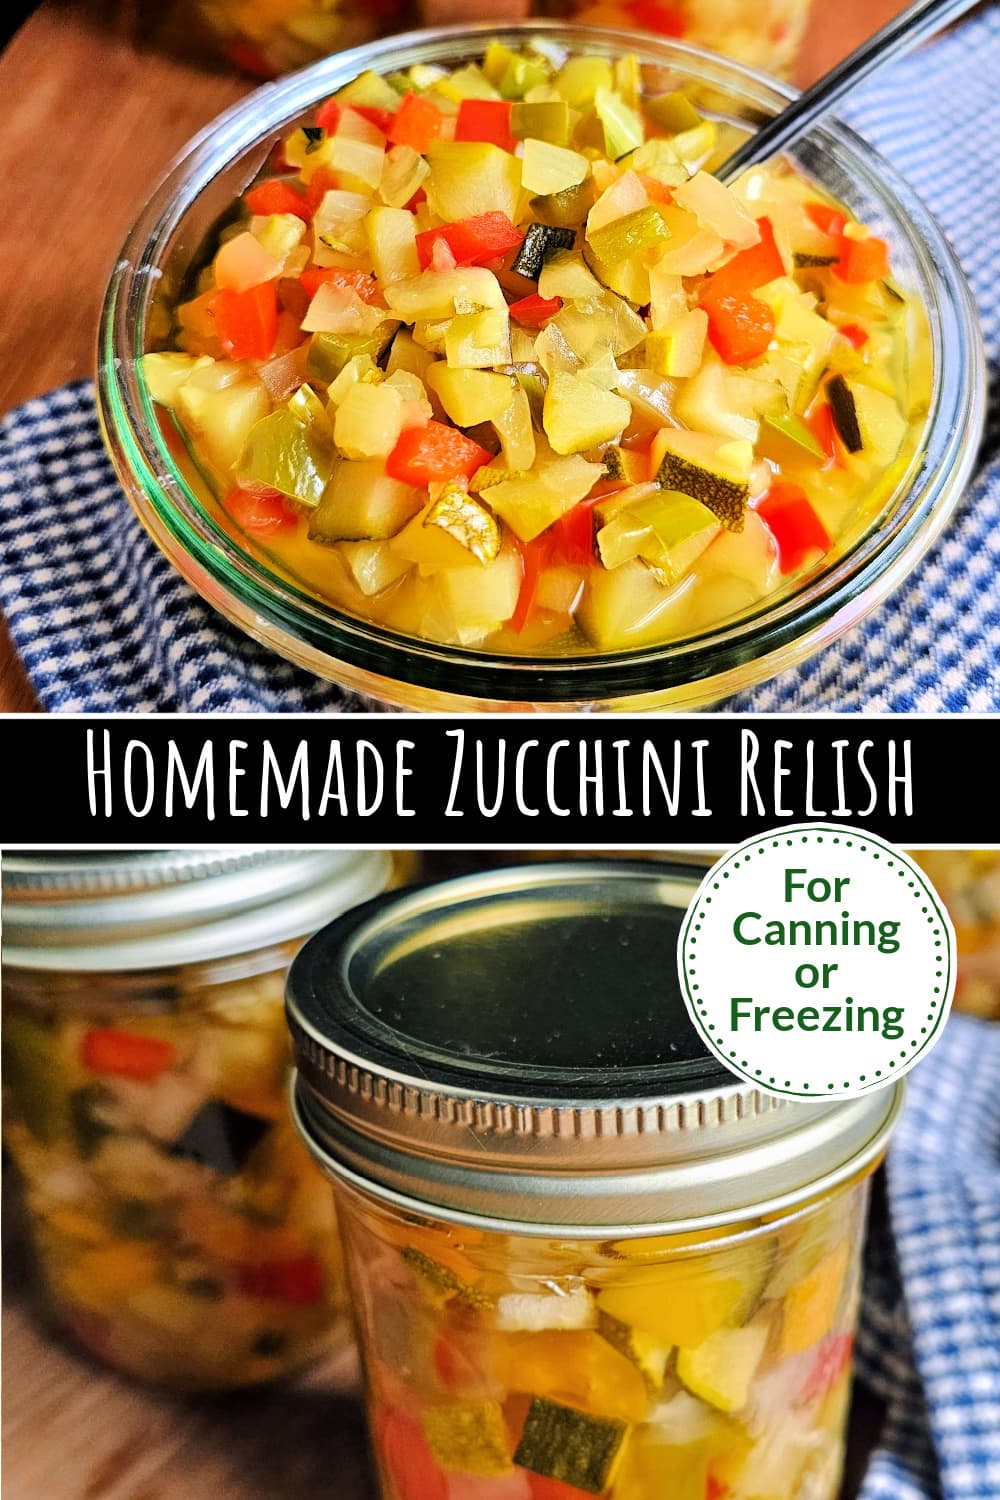 Zucchini Relish for Canning or Freezing